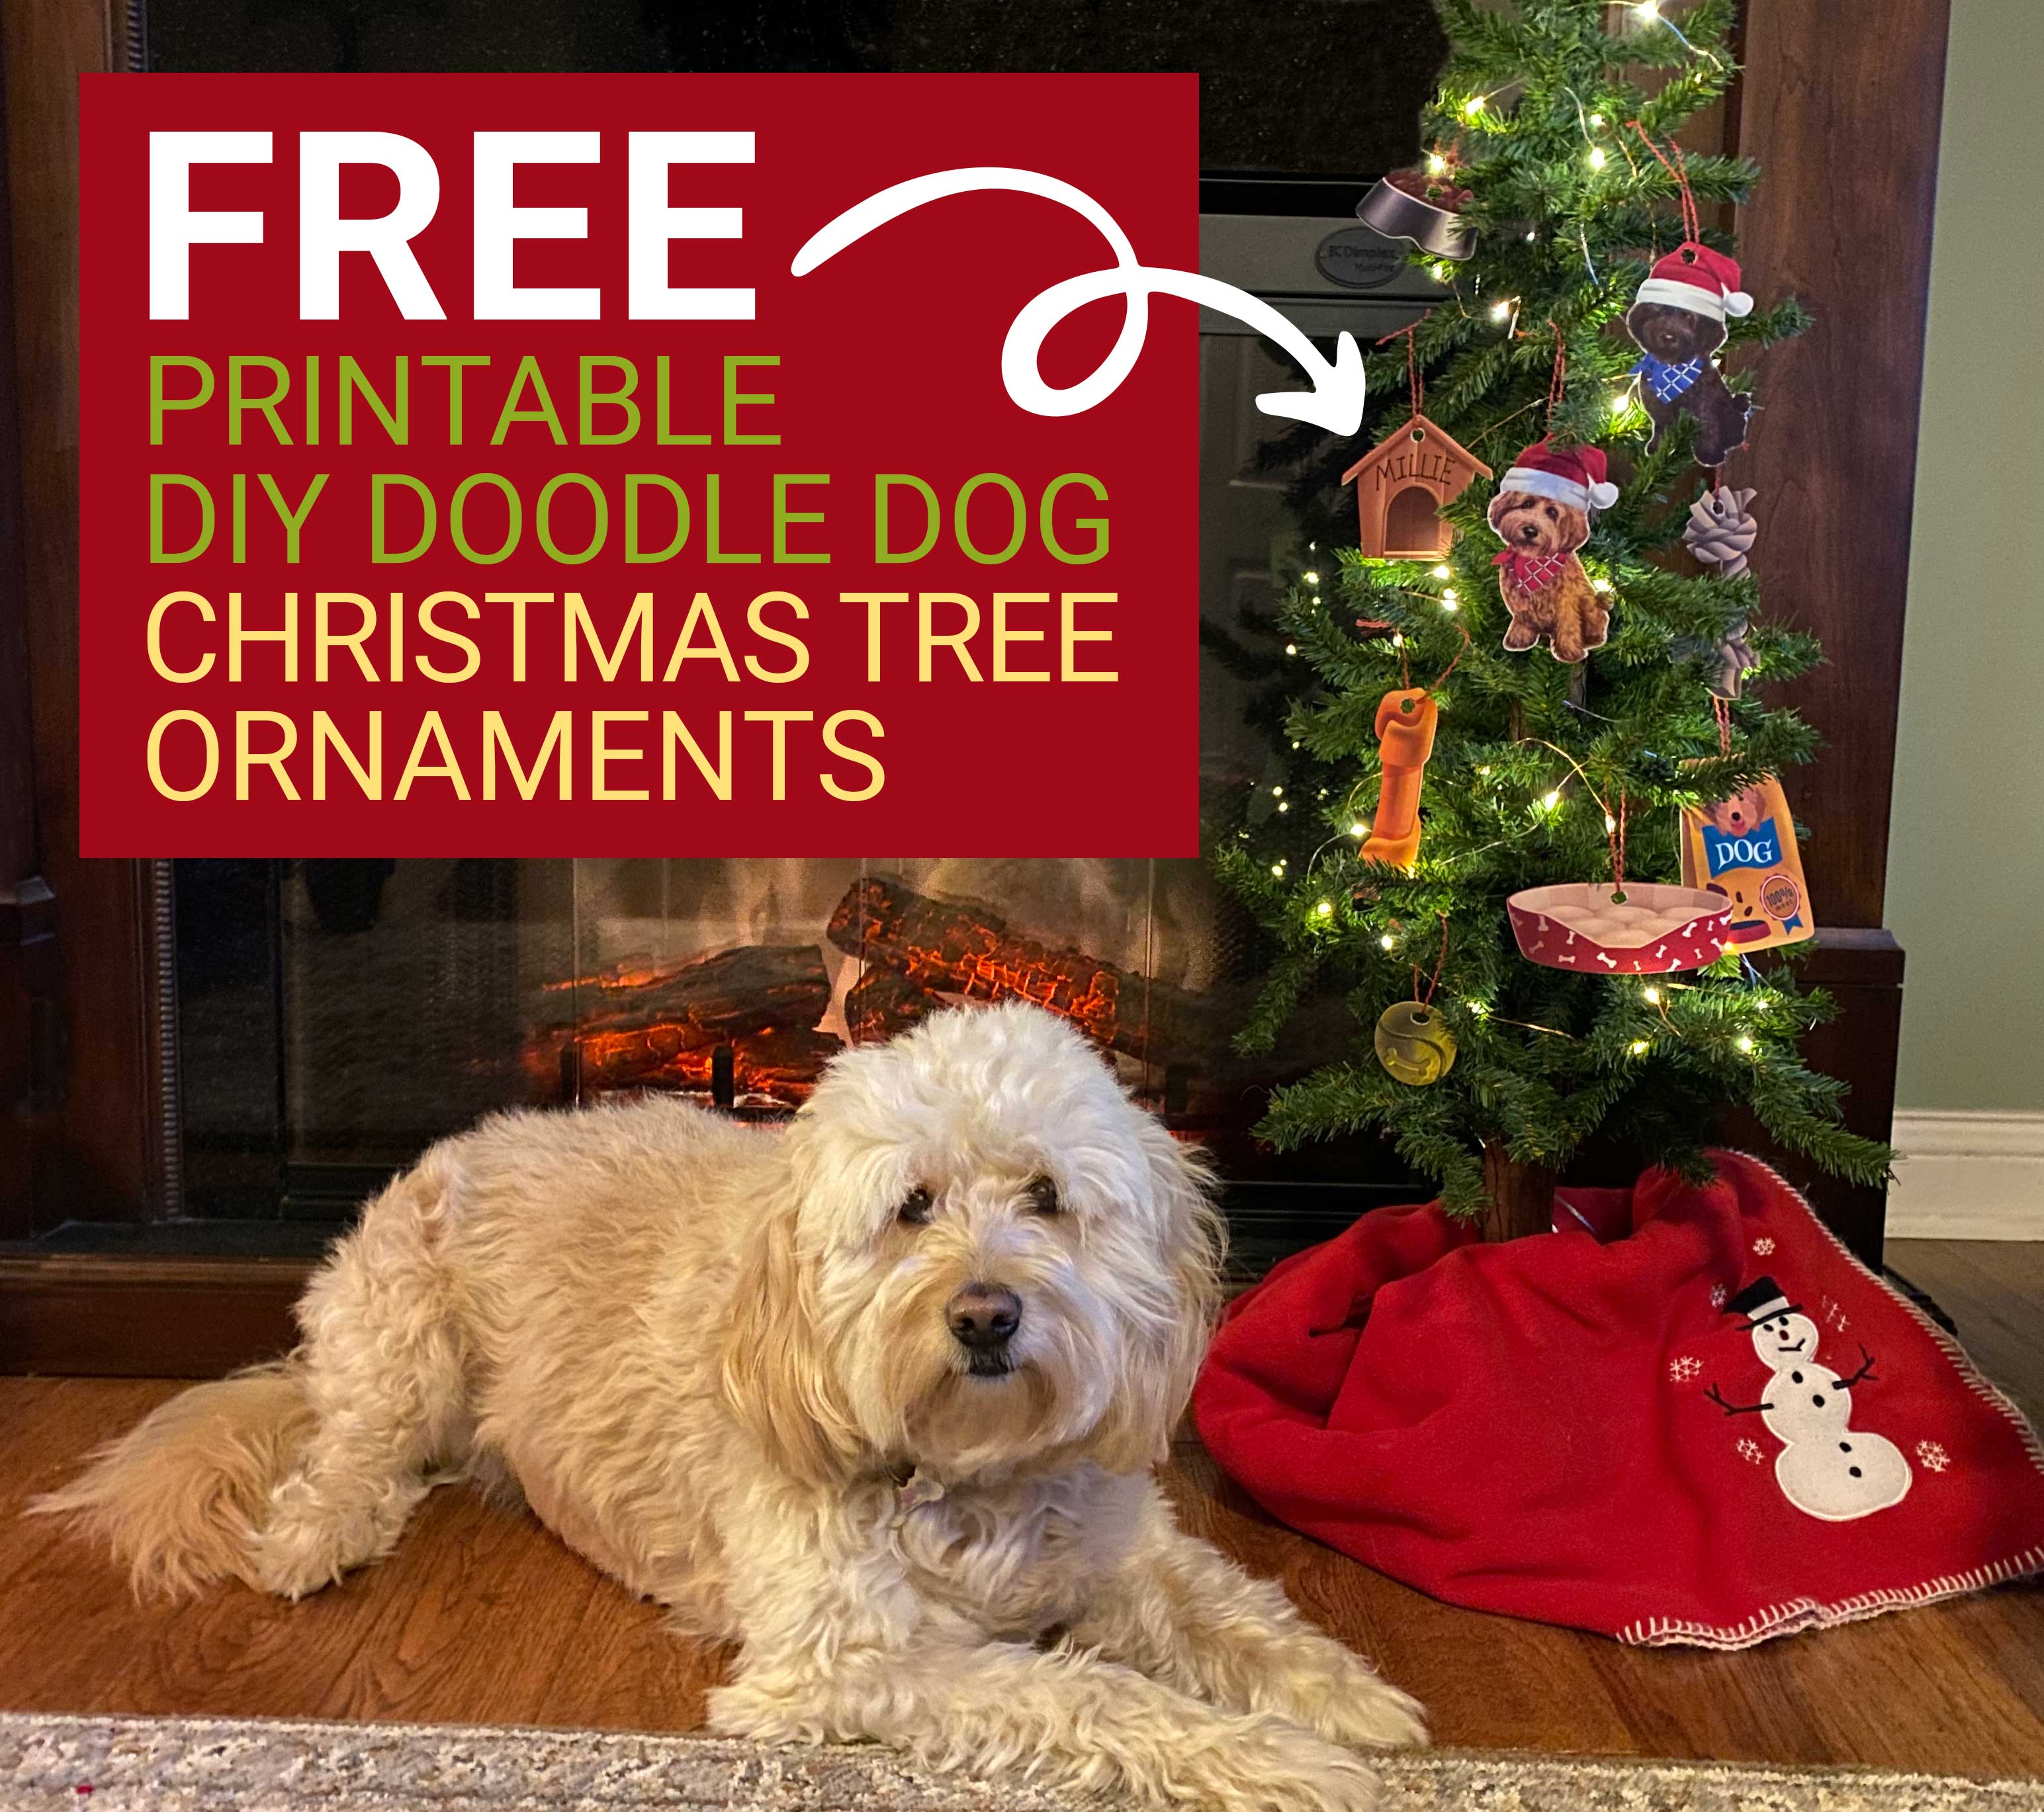 Mini Goldendoodle lying in front of fireplace next to small Christmas tree with DIY ornaments